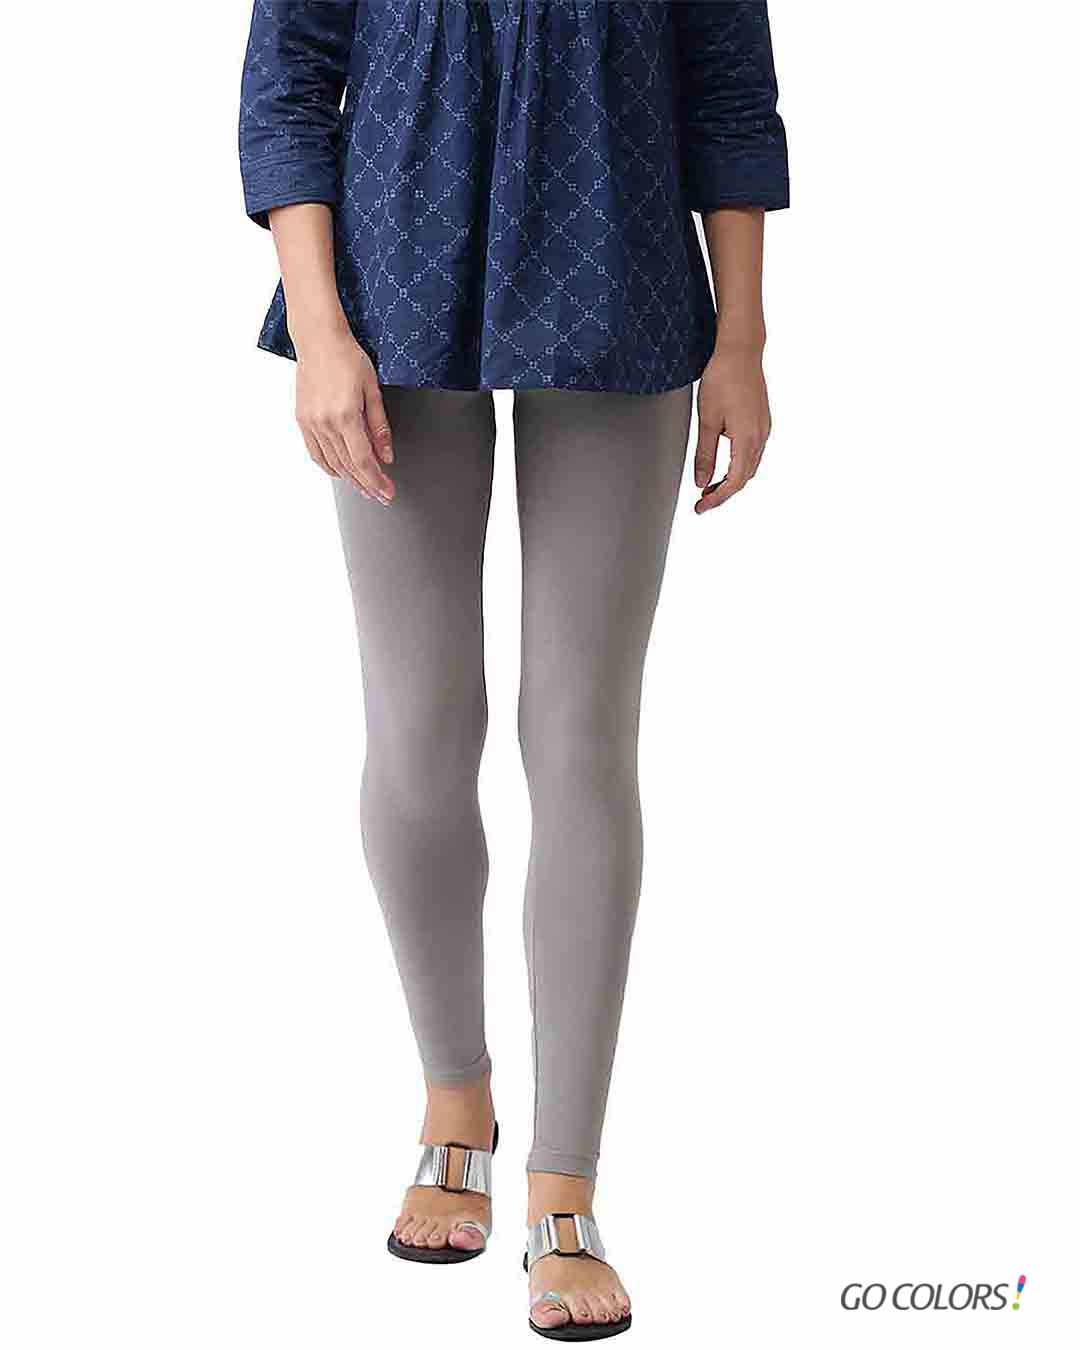 What Color Goes With Dark Grey Leggings Women's